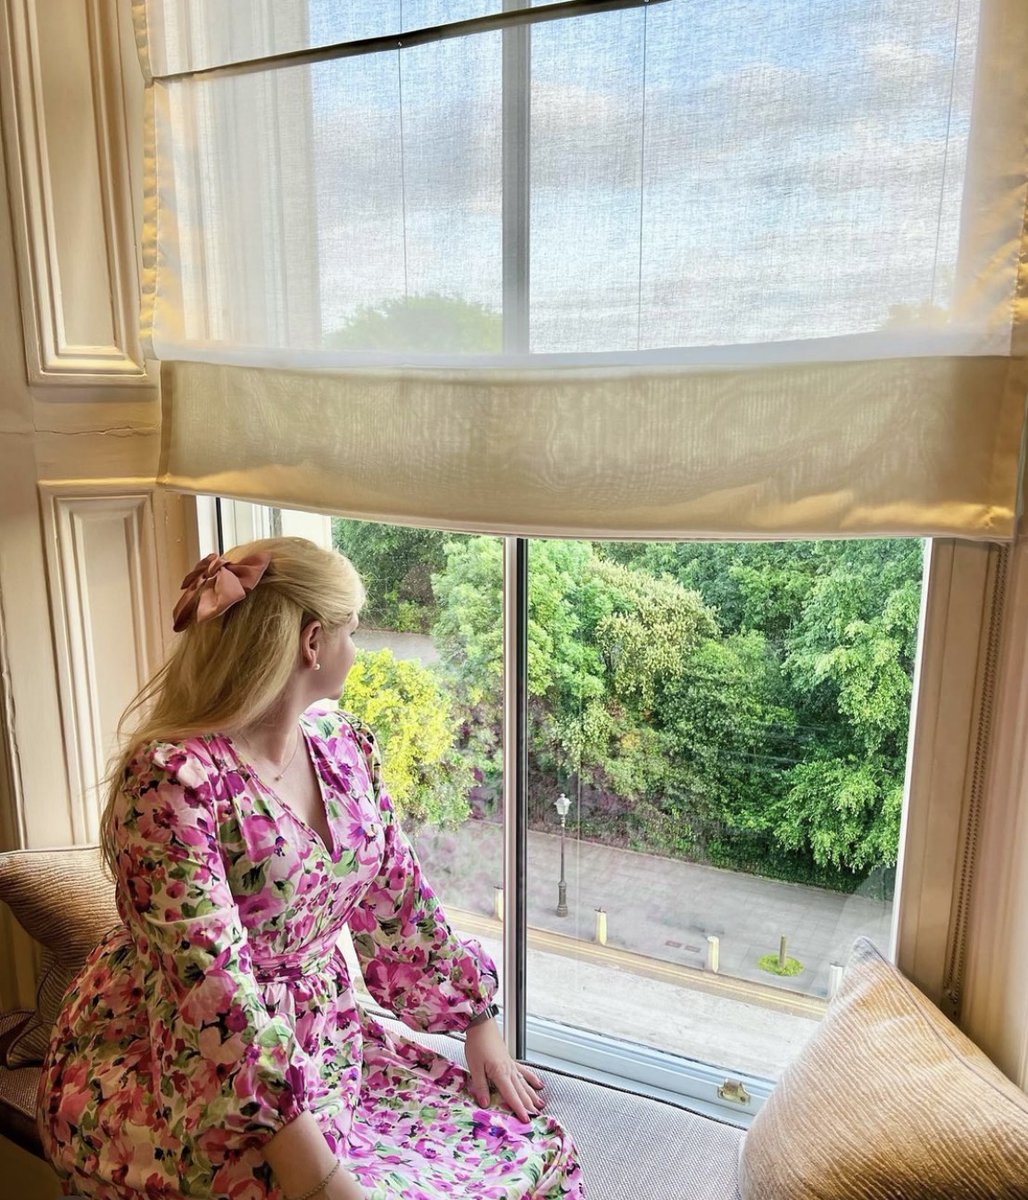 Our Signature Suites boast magnificent views over St Stephen's Green 🌸 

📸 credit - @sojournsinthesun

#theshelbournehotel #theshelbournedublin #cityviews #ststephensgreen #dublin #fivestar